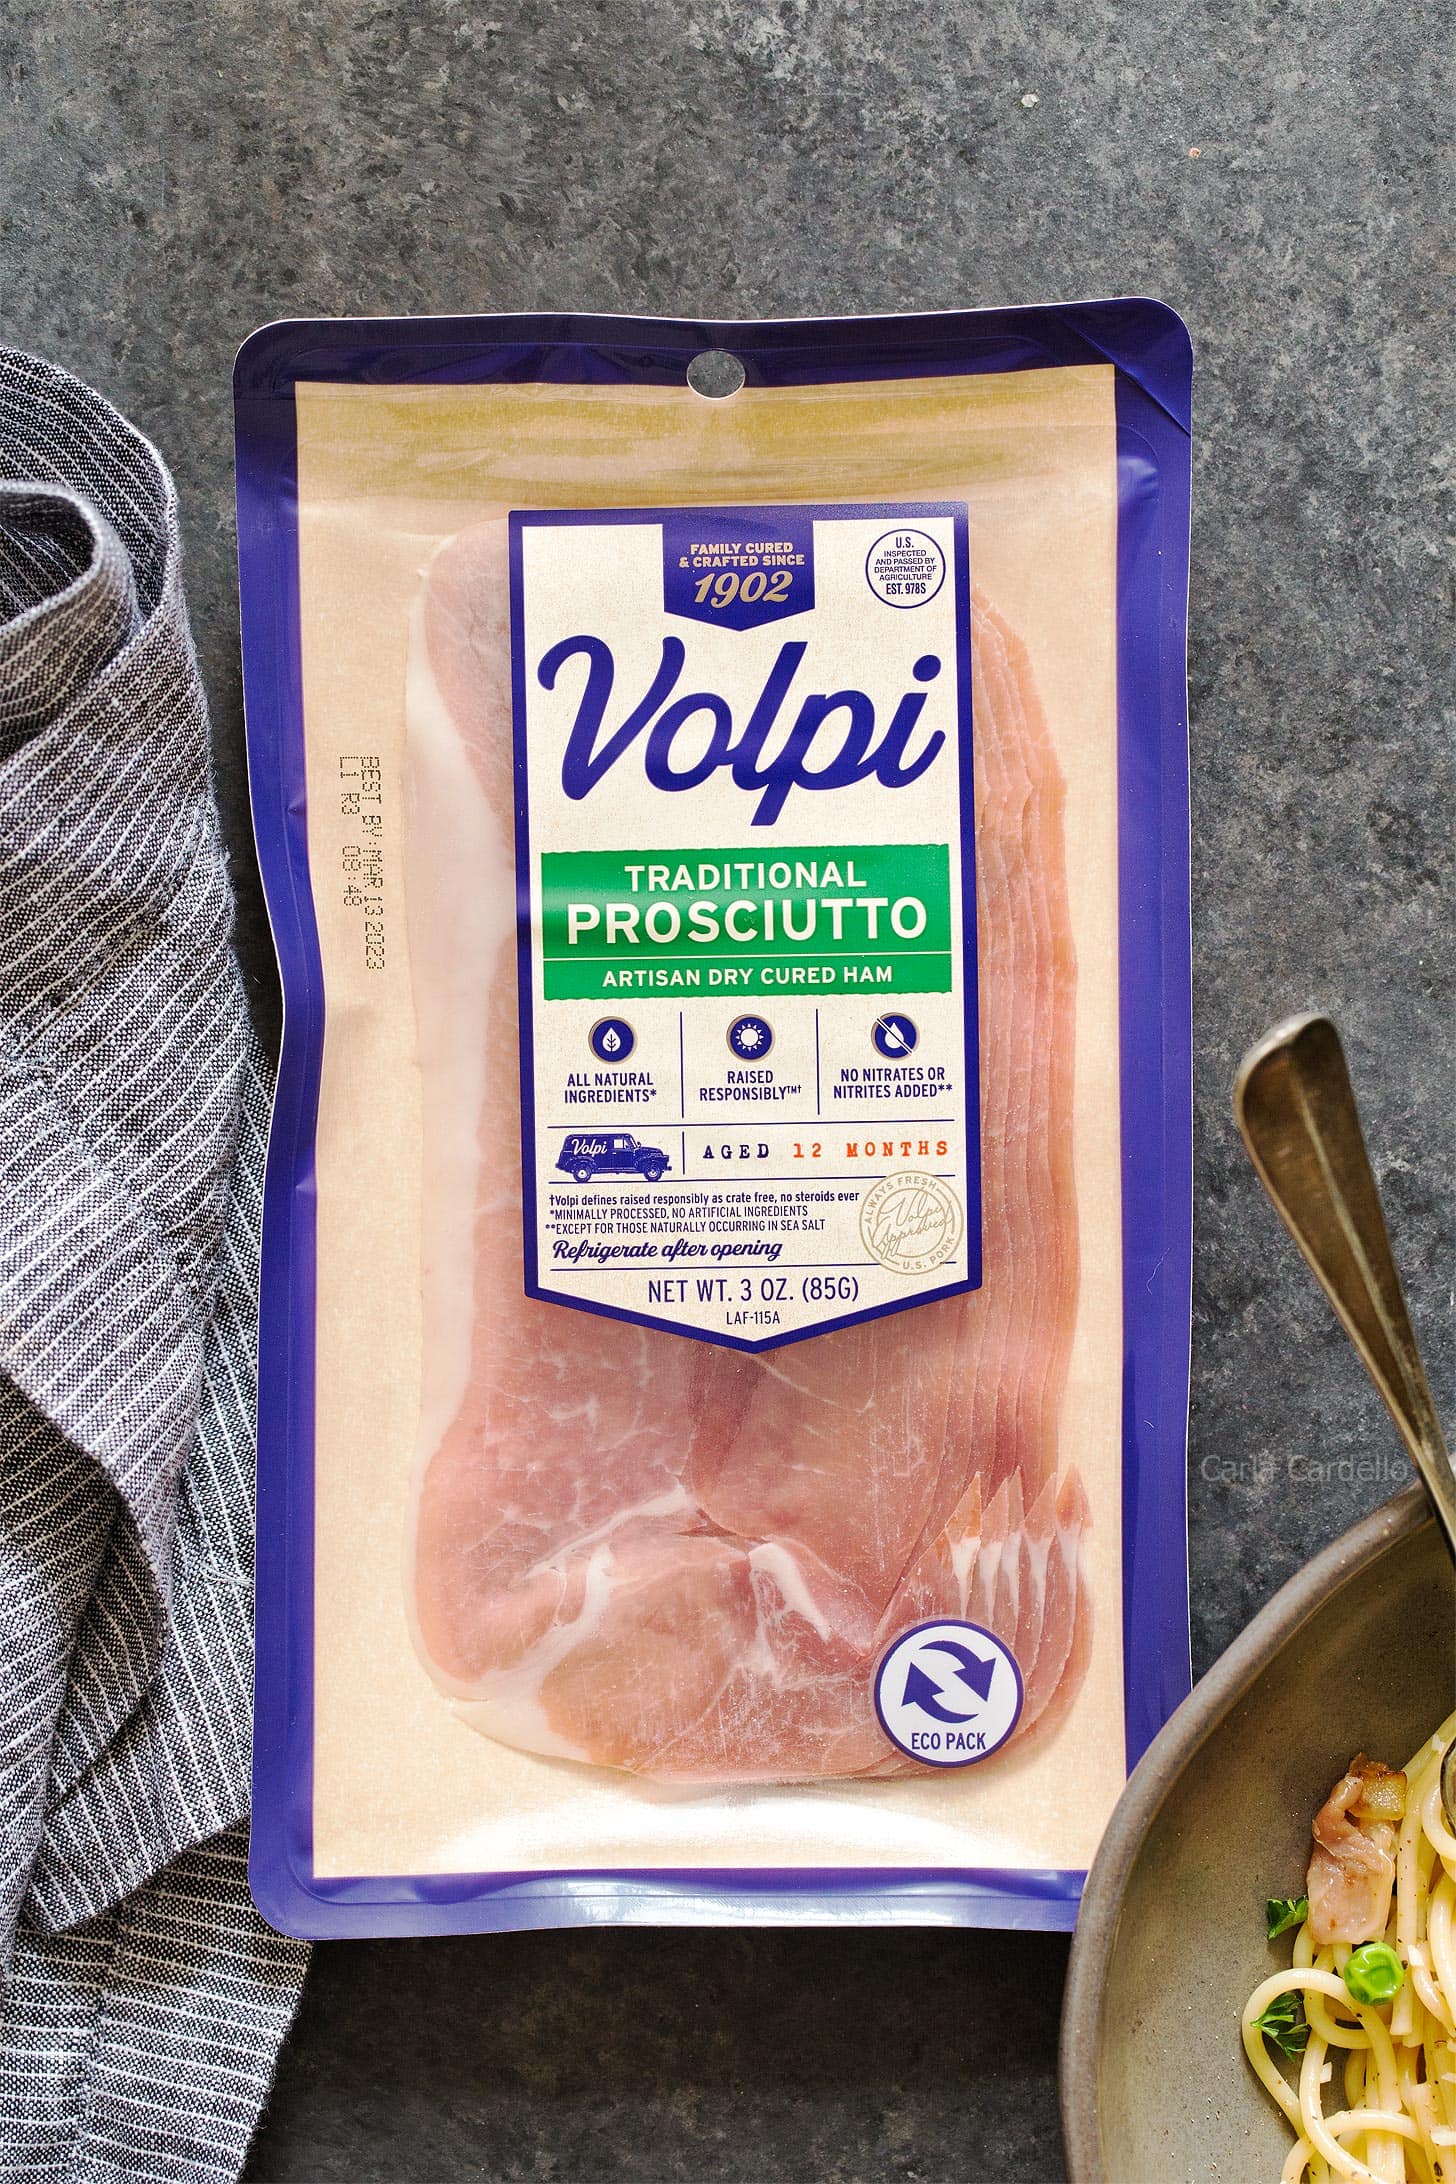 Package of Volpi Prosciutto